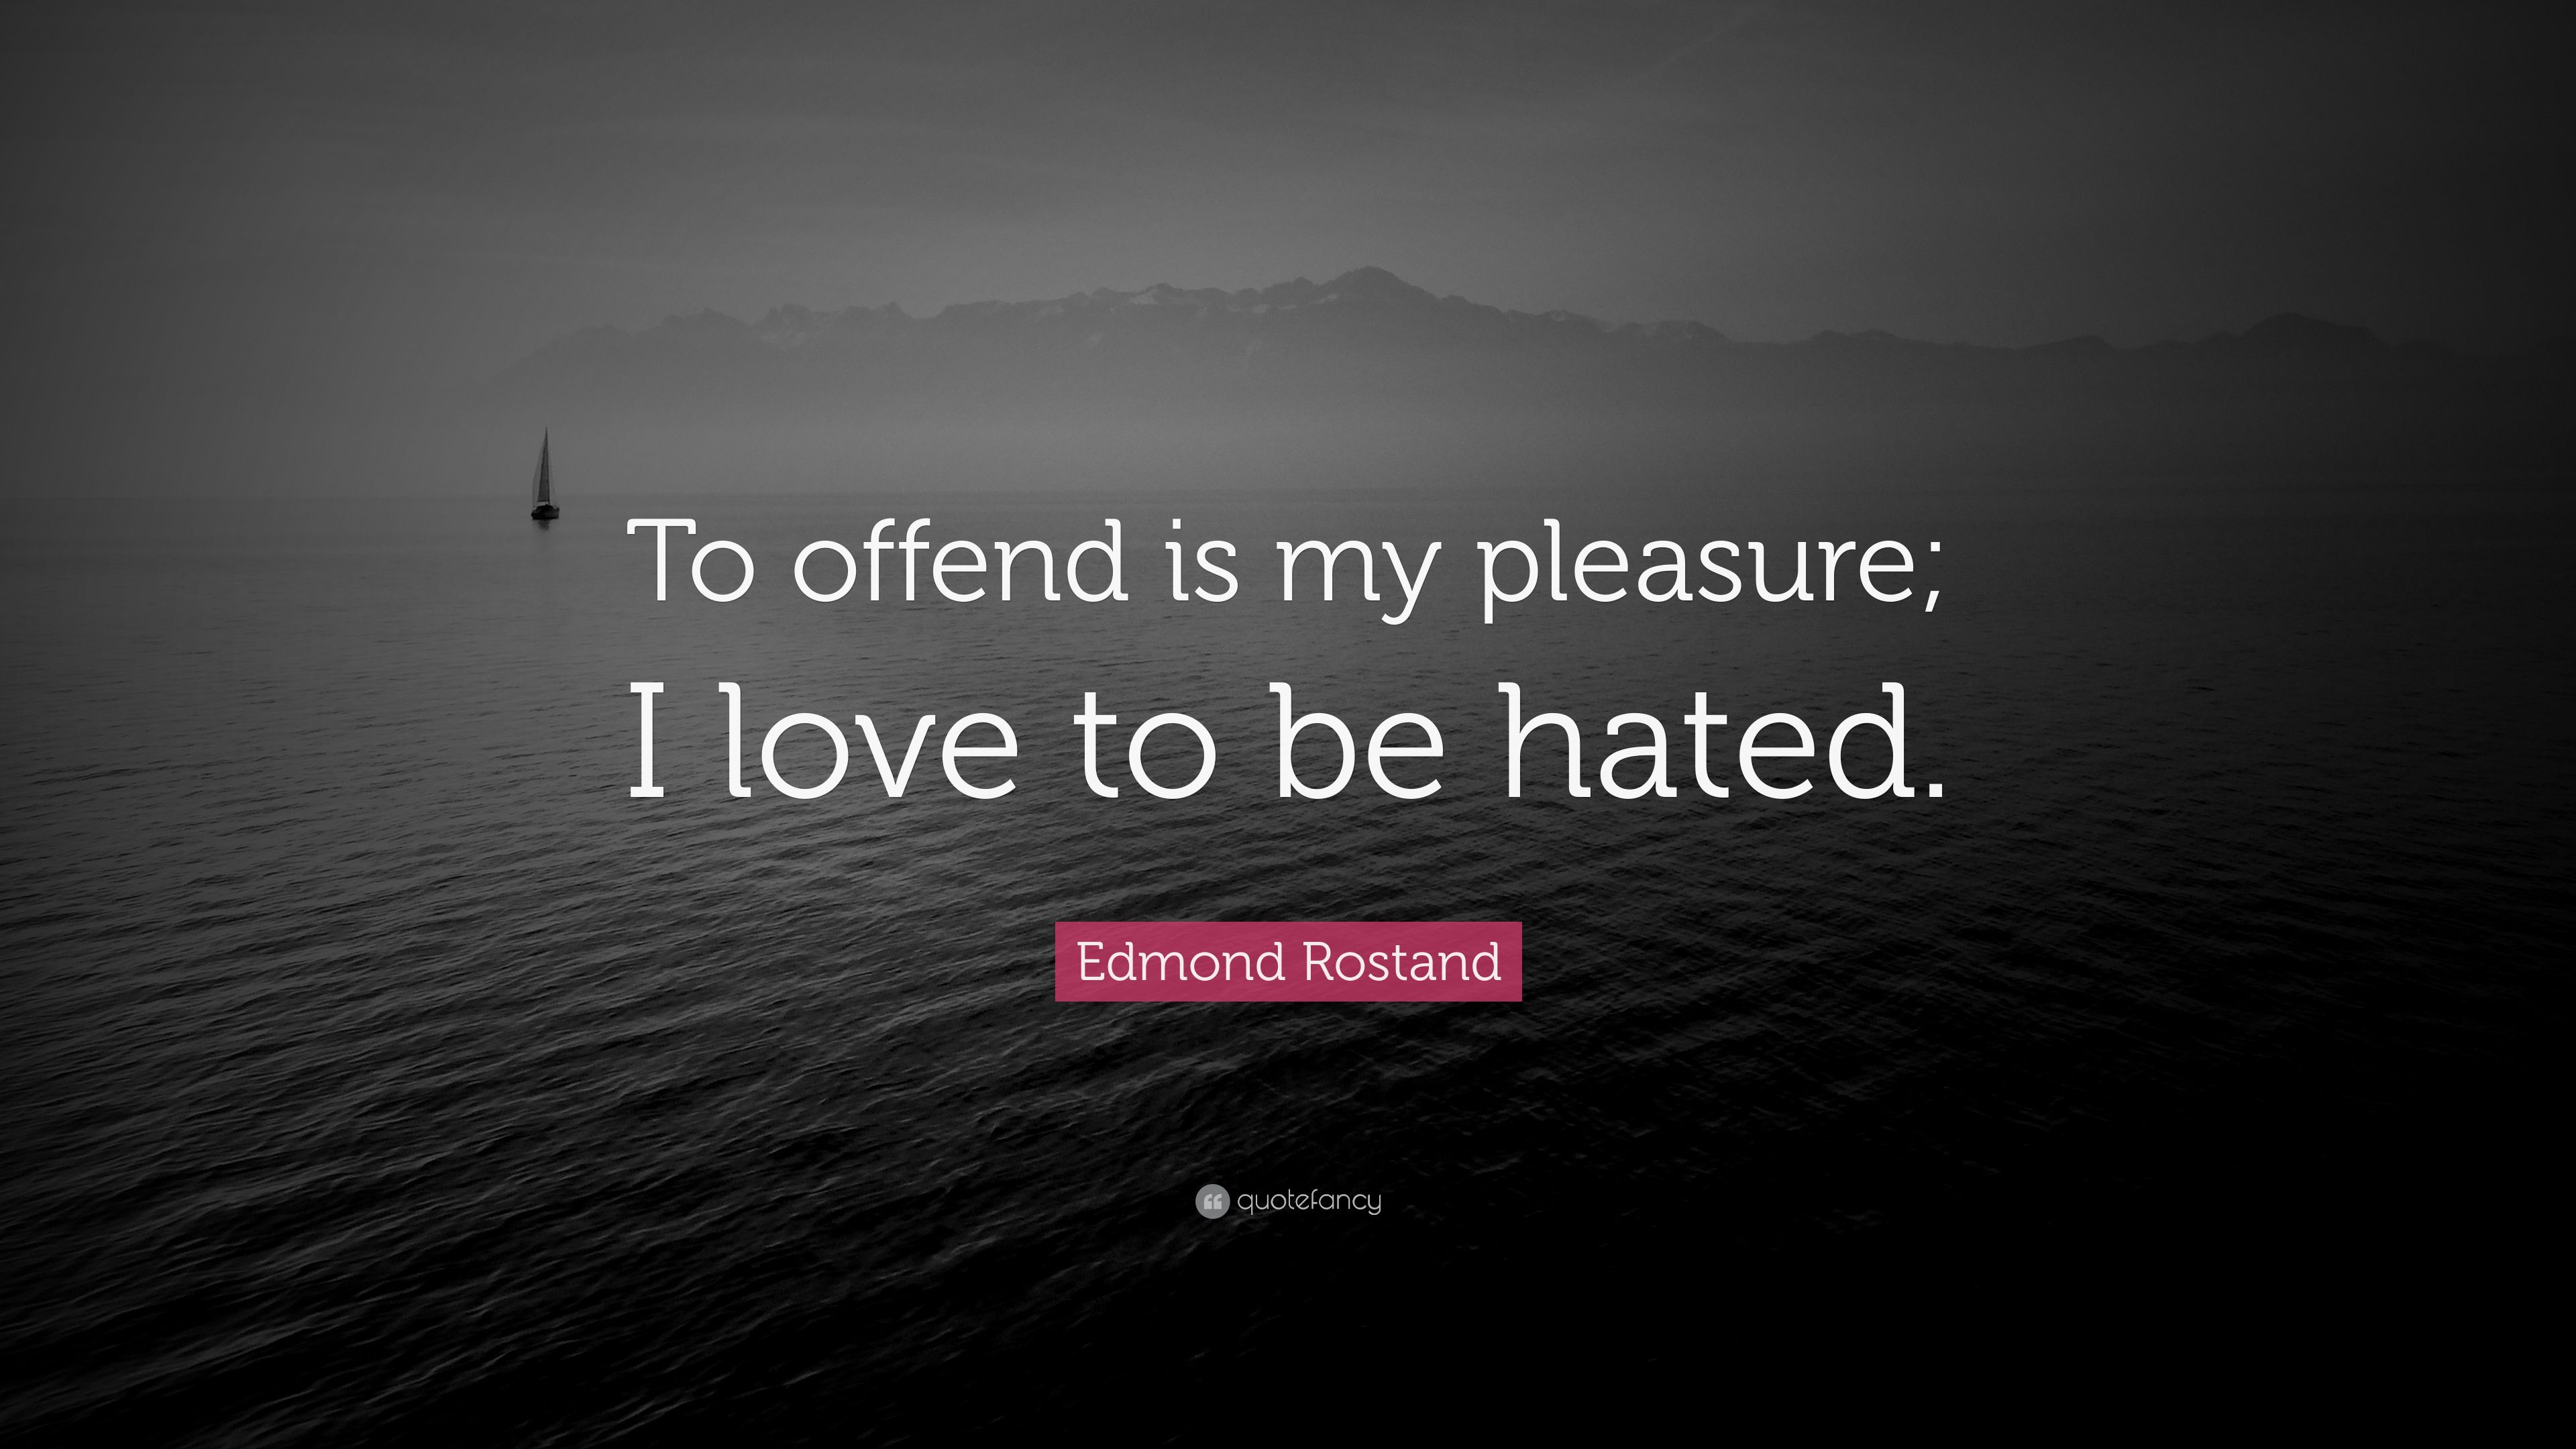 Edmond Rostand Quote: “To offend is my pleasure; I love to be